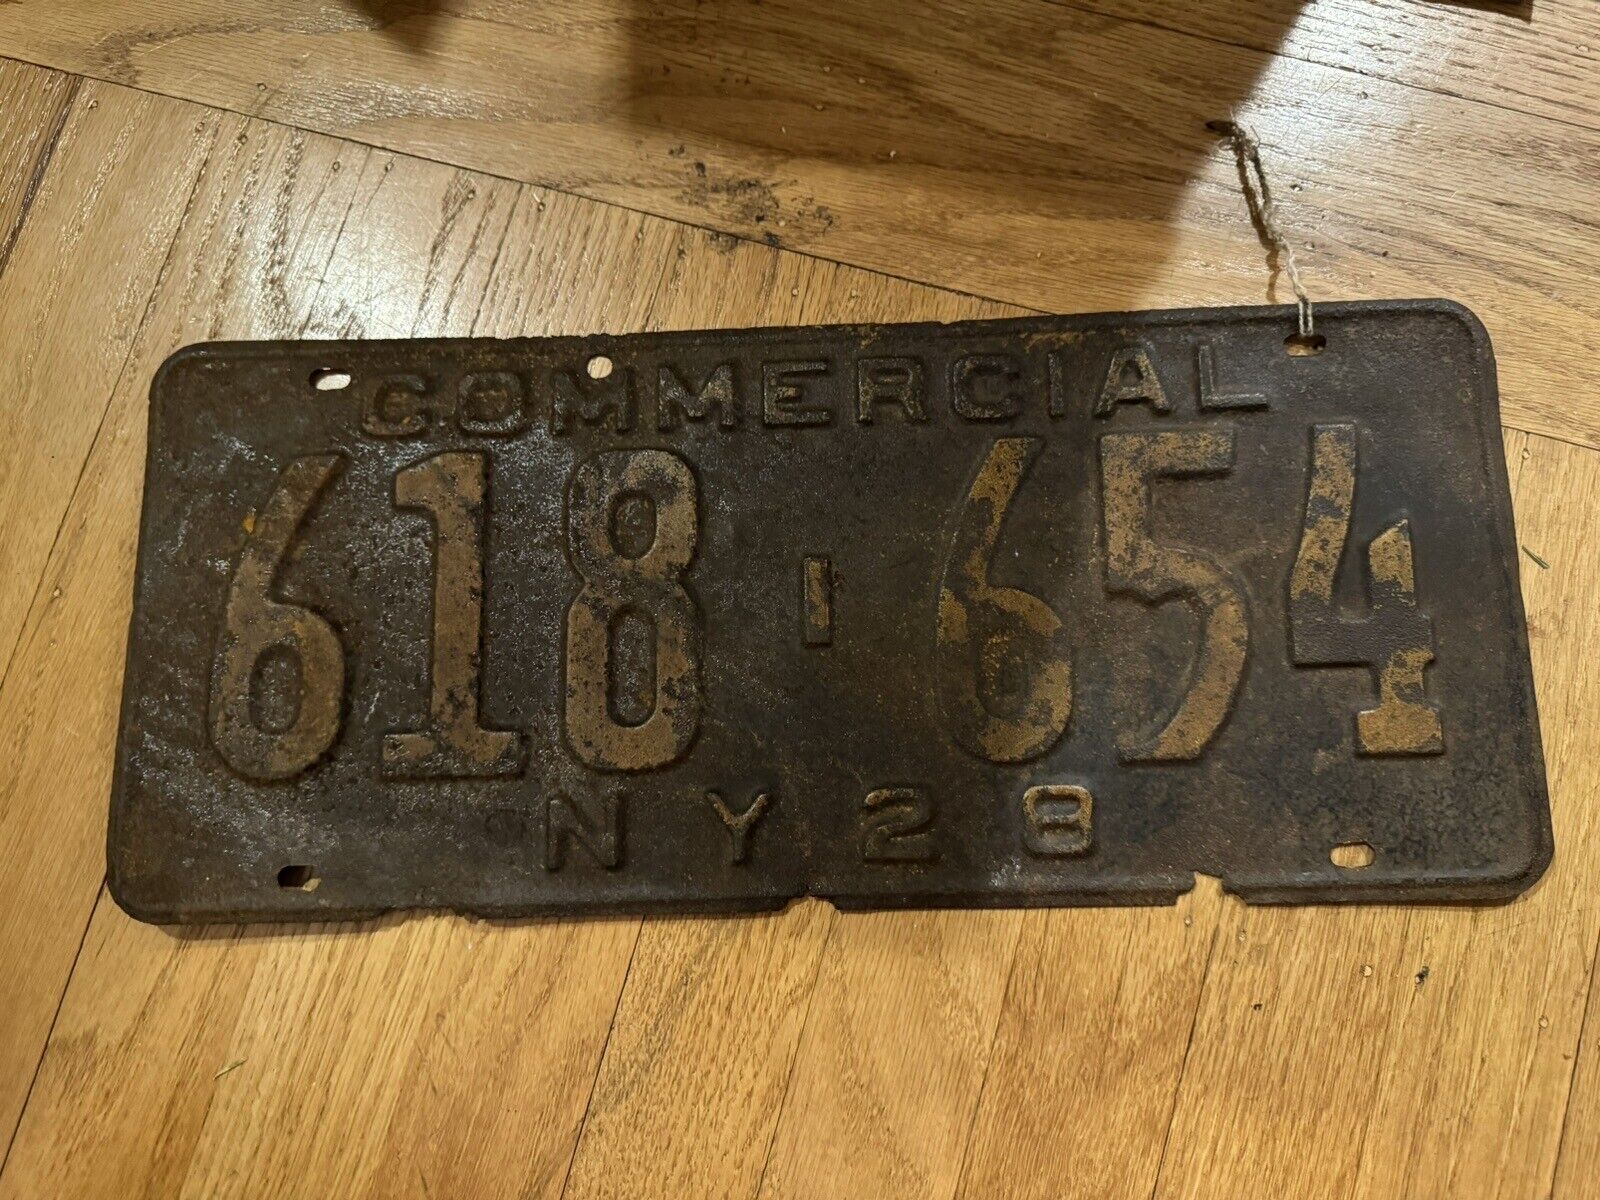 1928 NY New York Commercial License Plate Bar Man cave vintage